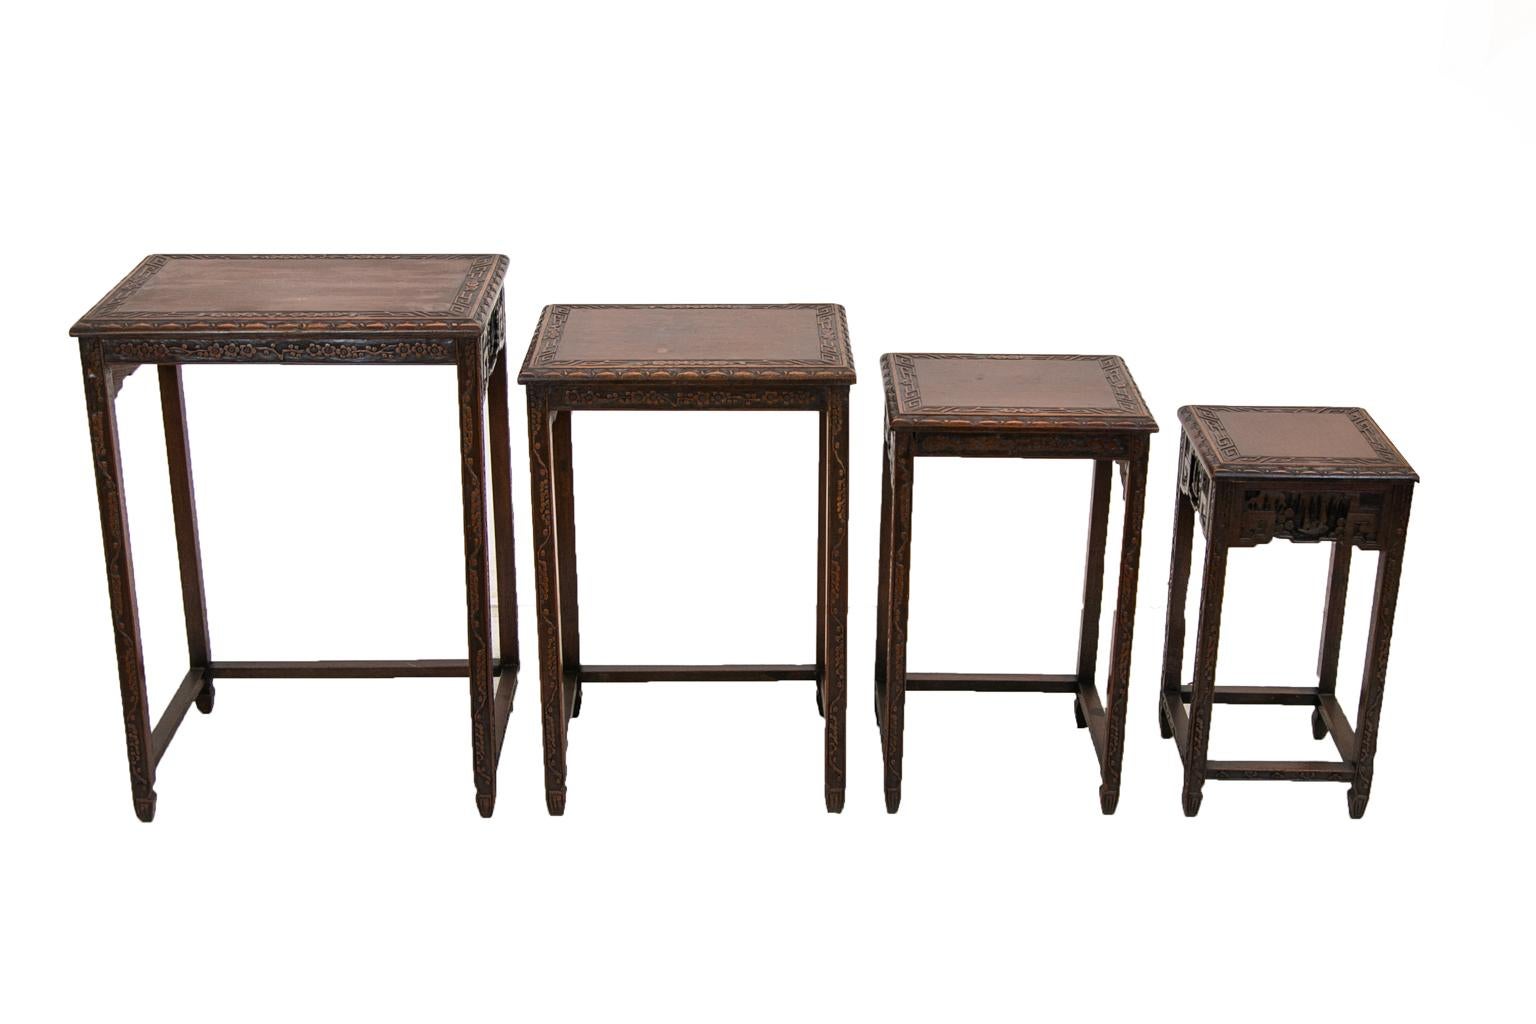 Early 20th Century Nest of Four Chinese Teakwood Tables